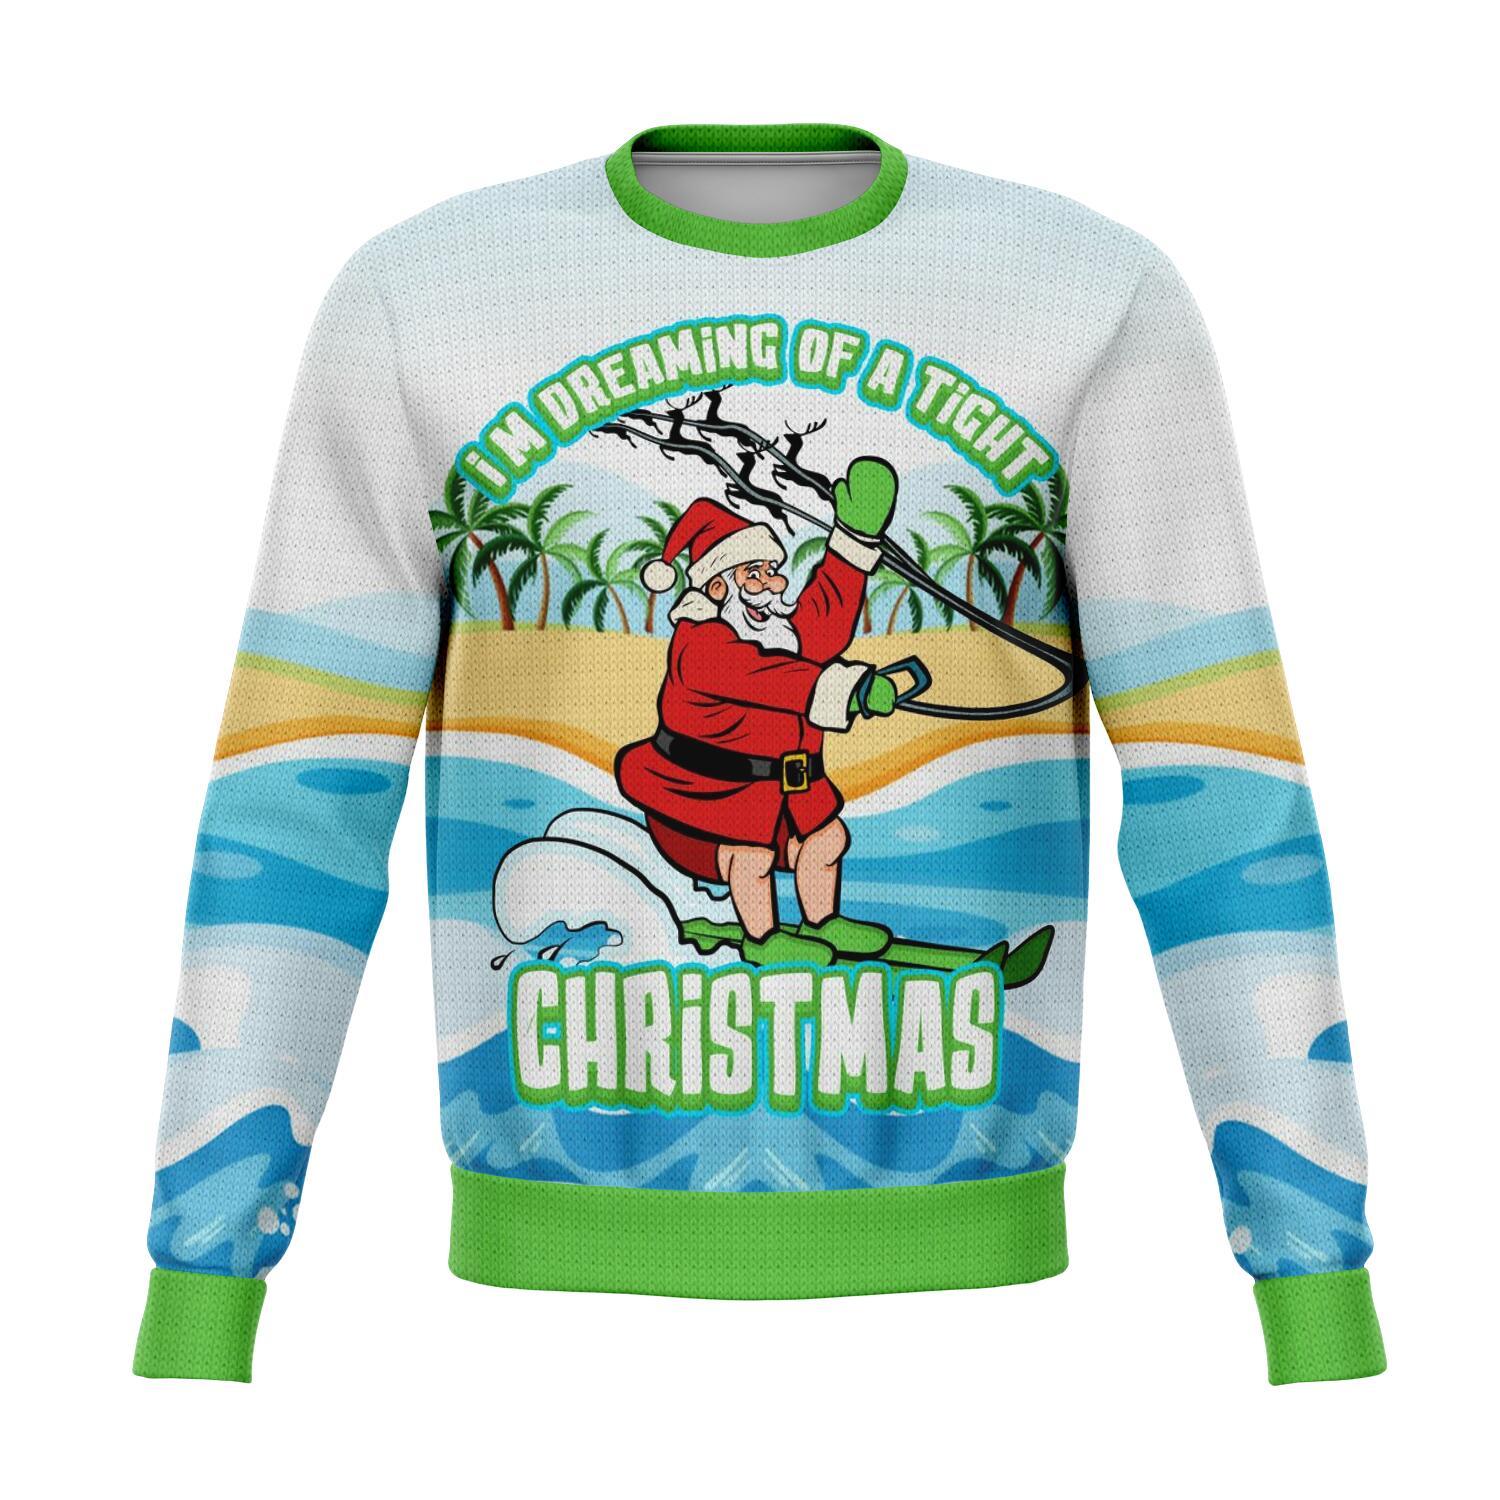 I'm Dreaming Of A Tight Christmas Ugly Christmas Sweater - Houseboat Kings